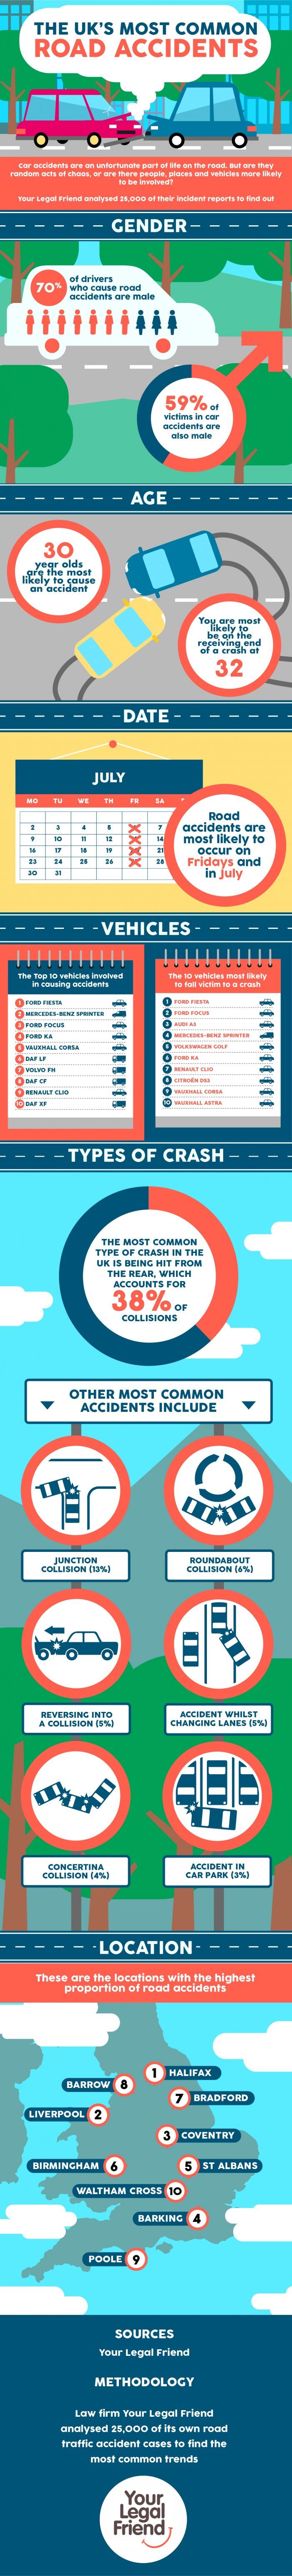 Most Common Road Accidents & What to Do After a Crash